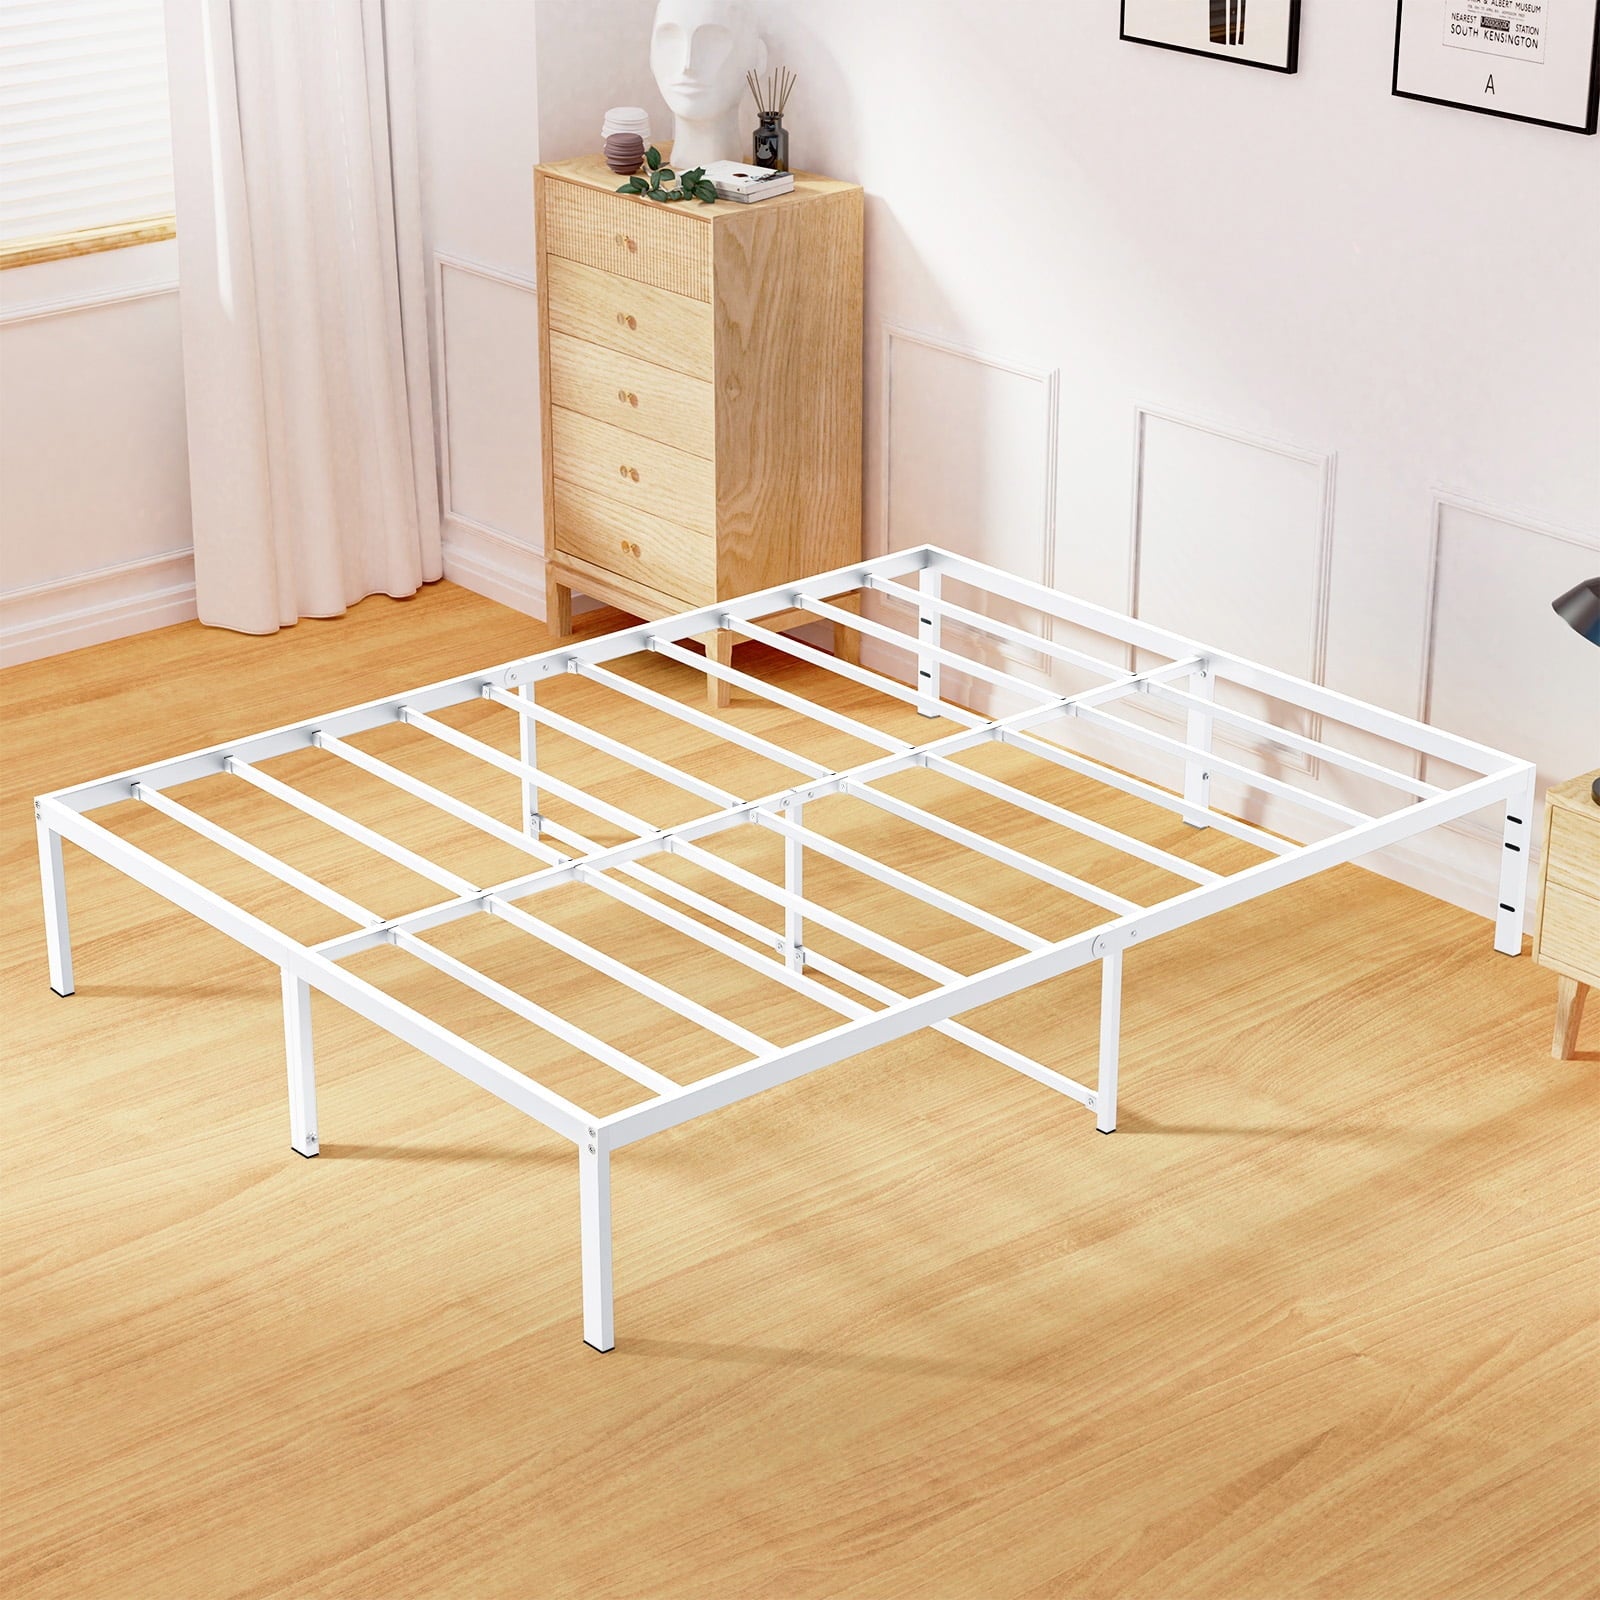 Lusimo Full Size Bed Frame No Box Spring Needed 14 inch Heavy Duty Metal Platform Bed Frame Full Anti-Slip Support Easy Lock Assembly, White